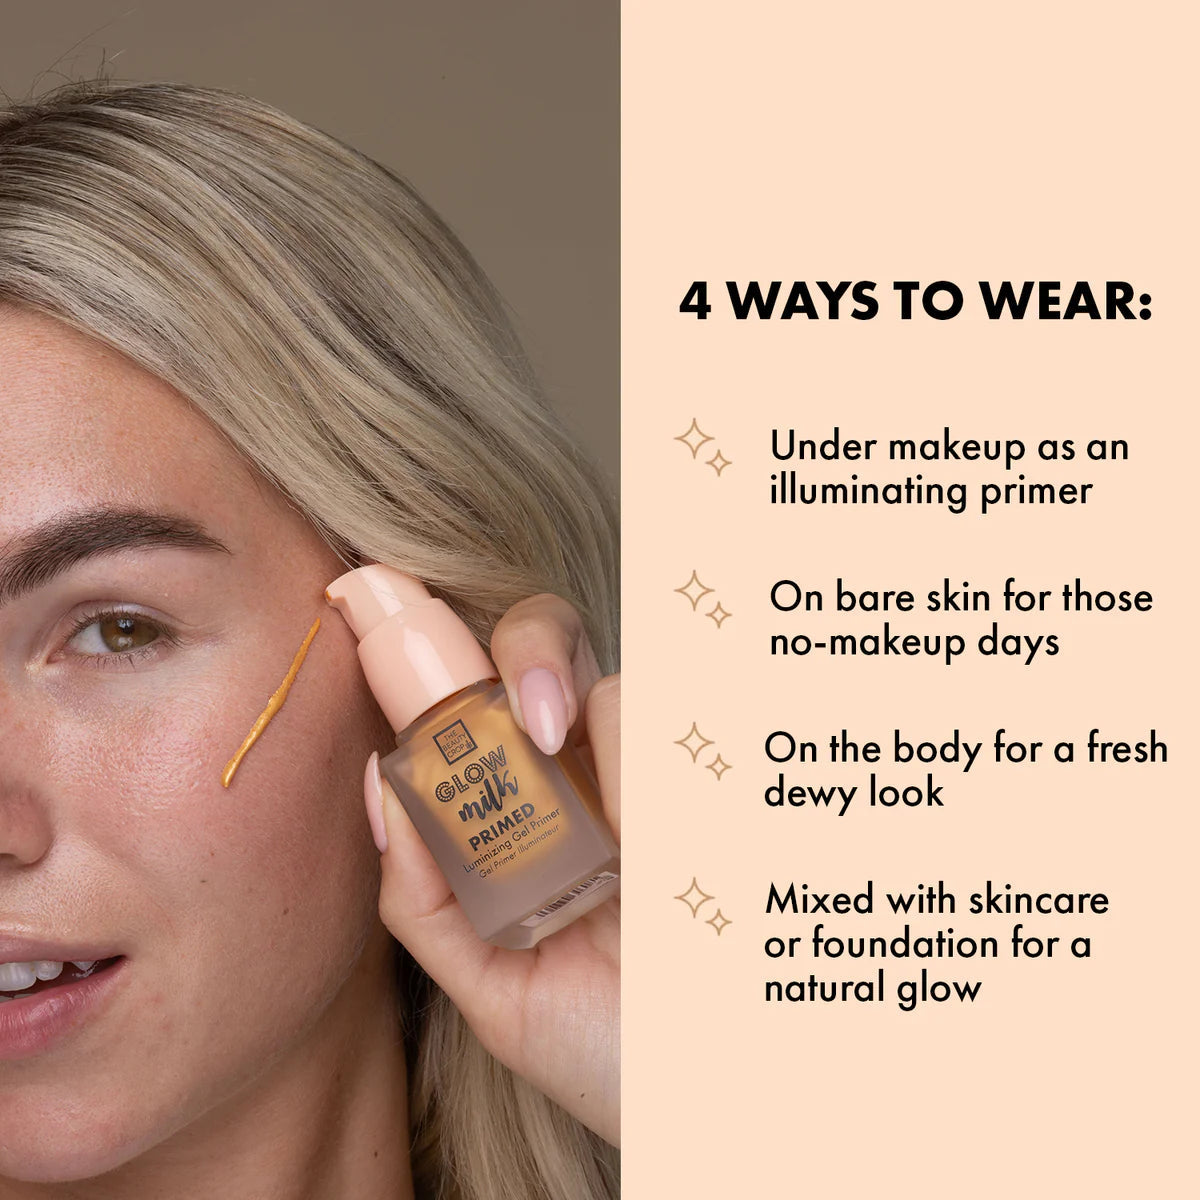 4 ways to wear: under makeup as illuminating primer, on bare skin for those no-makeup days, on the body for a fresh dewy look, mixed with skincare or foundation for natural glow